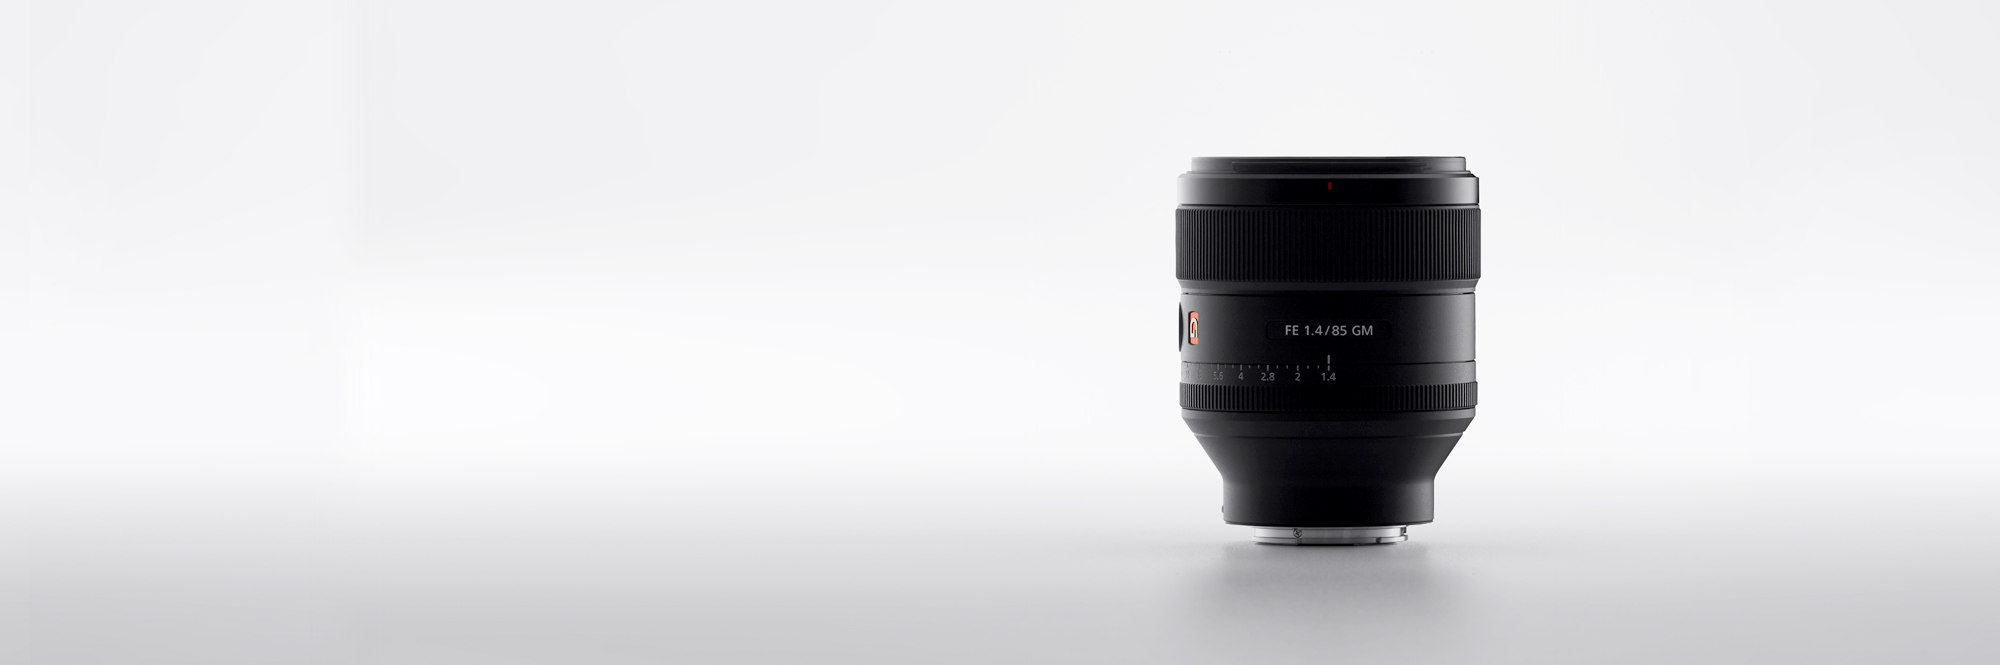 G MASTER FE 85mm F1.4 GM Commentary of Engineers - FE 85mm F1.4 GM J҃C^r[ -